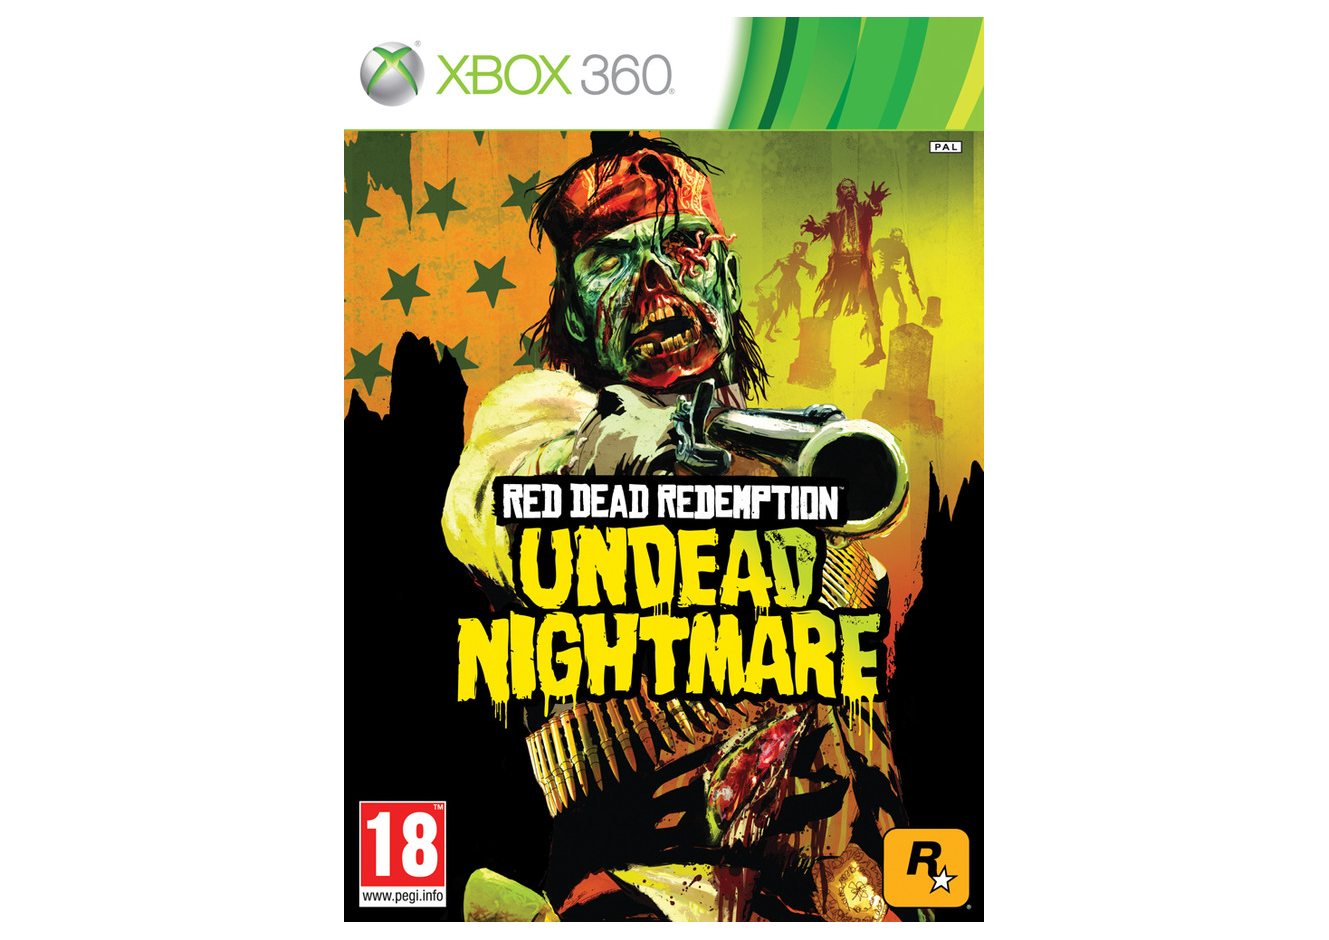 Xbox 360 Red Dead Redemption Undead Nightmare Xbox 360